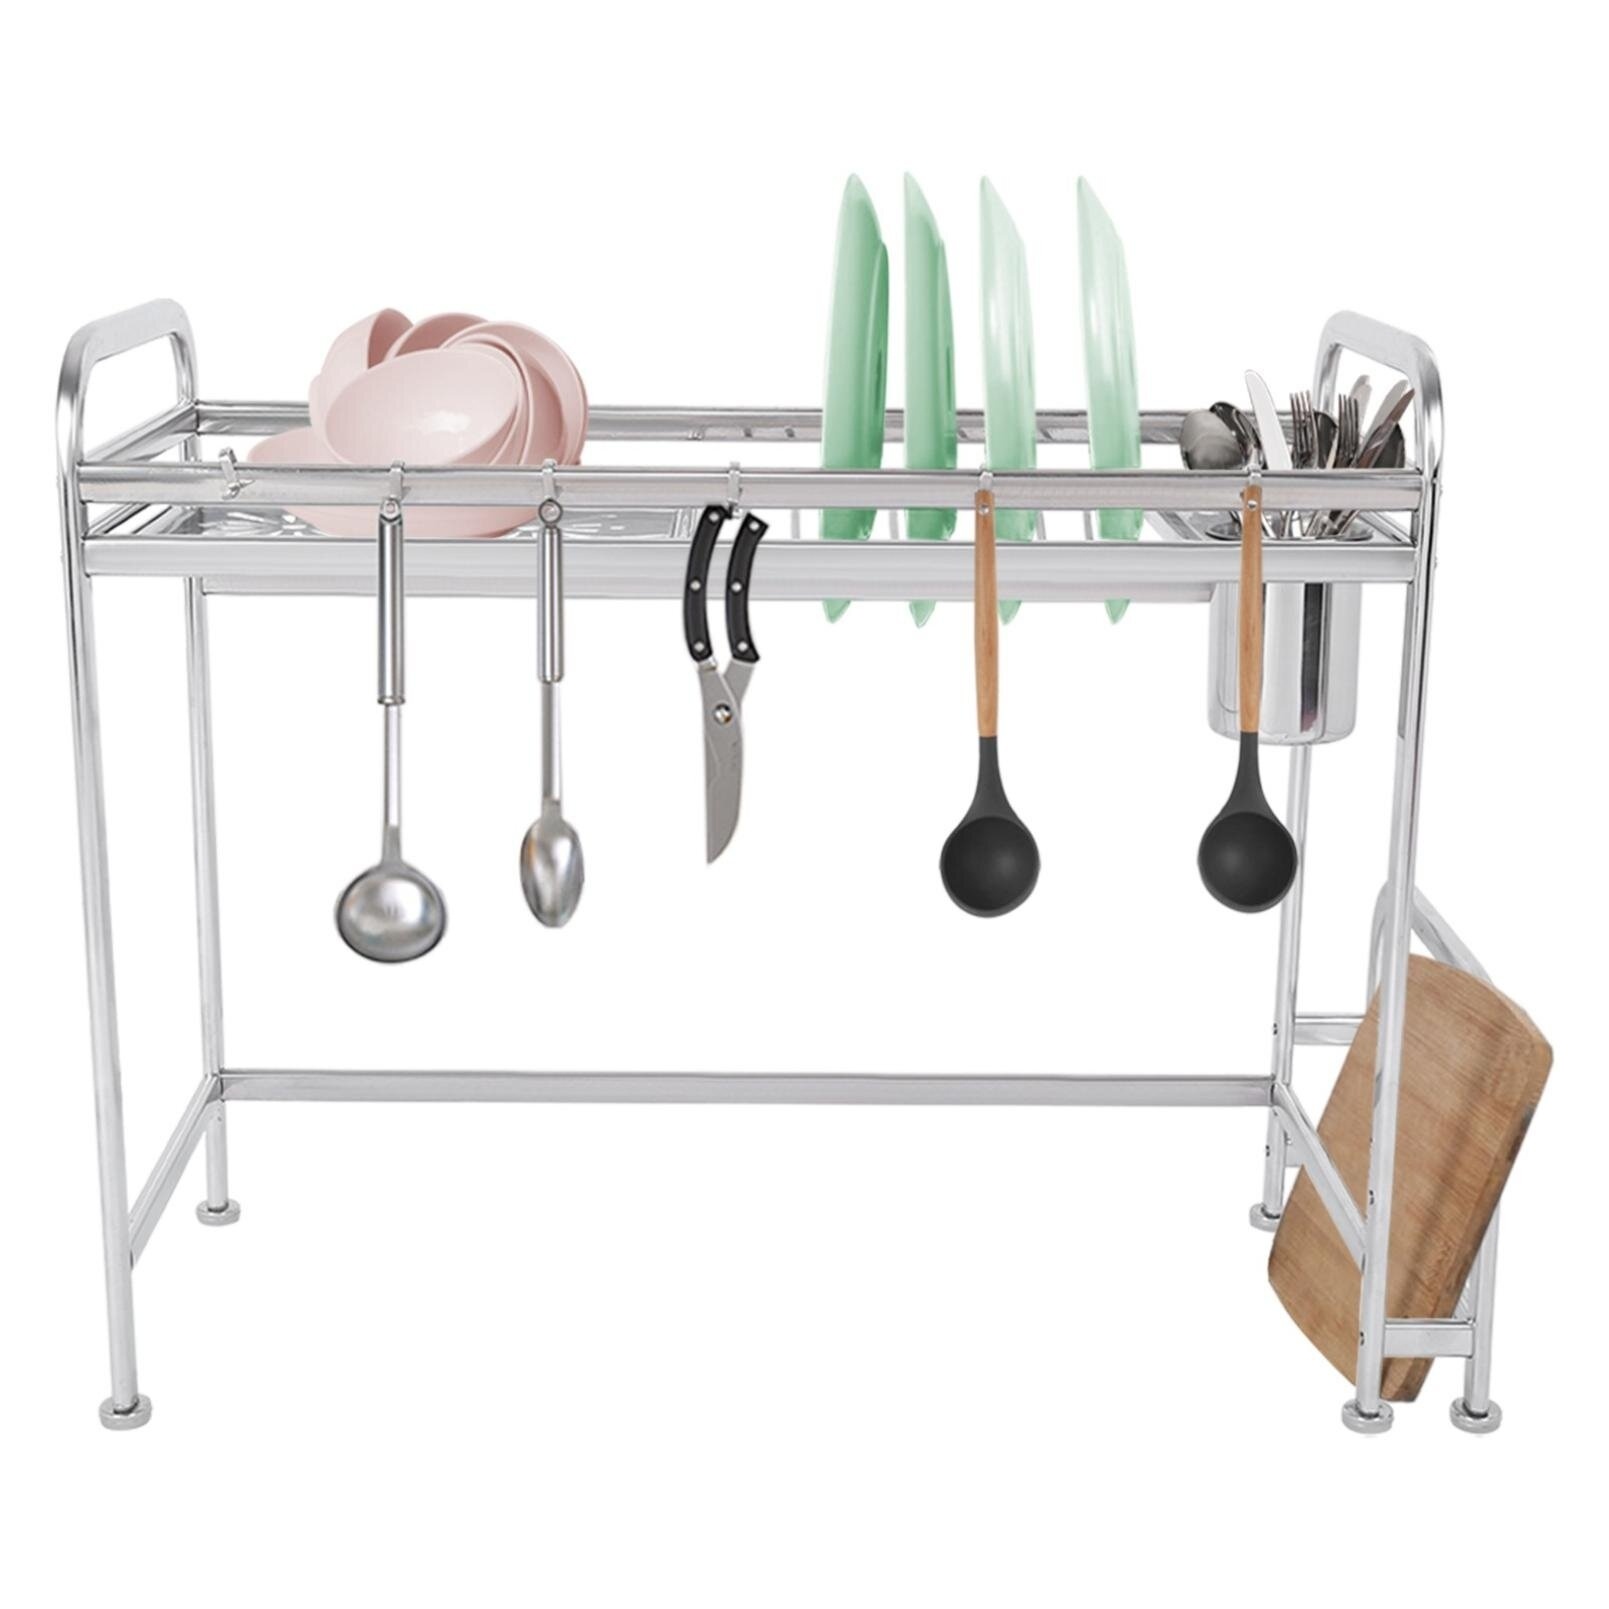 Over Sink Dish Drying Rack, Stainless Steel 2 Tier Large Dish Drainer Above  Sink Adjustable 27.5 - 34.6, Expandable Kitchen Counter Organizer